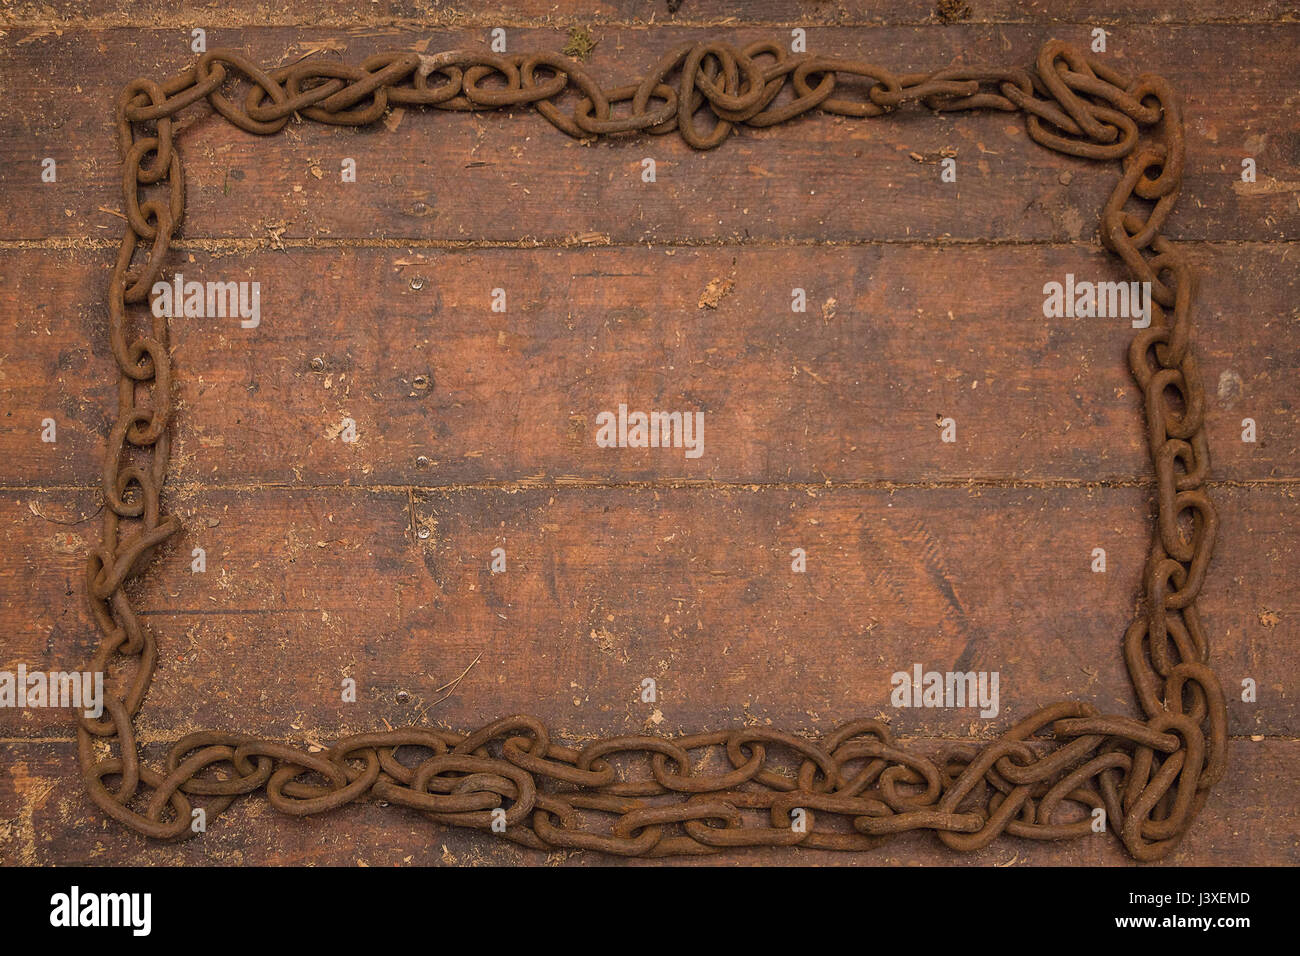 Grunge retro wooden background, old rusty iron chain frame. Stock Photo